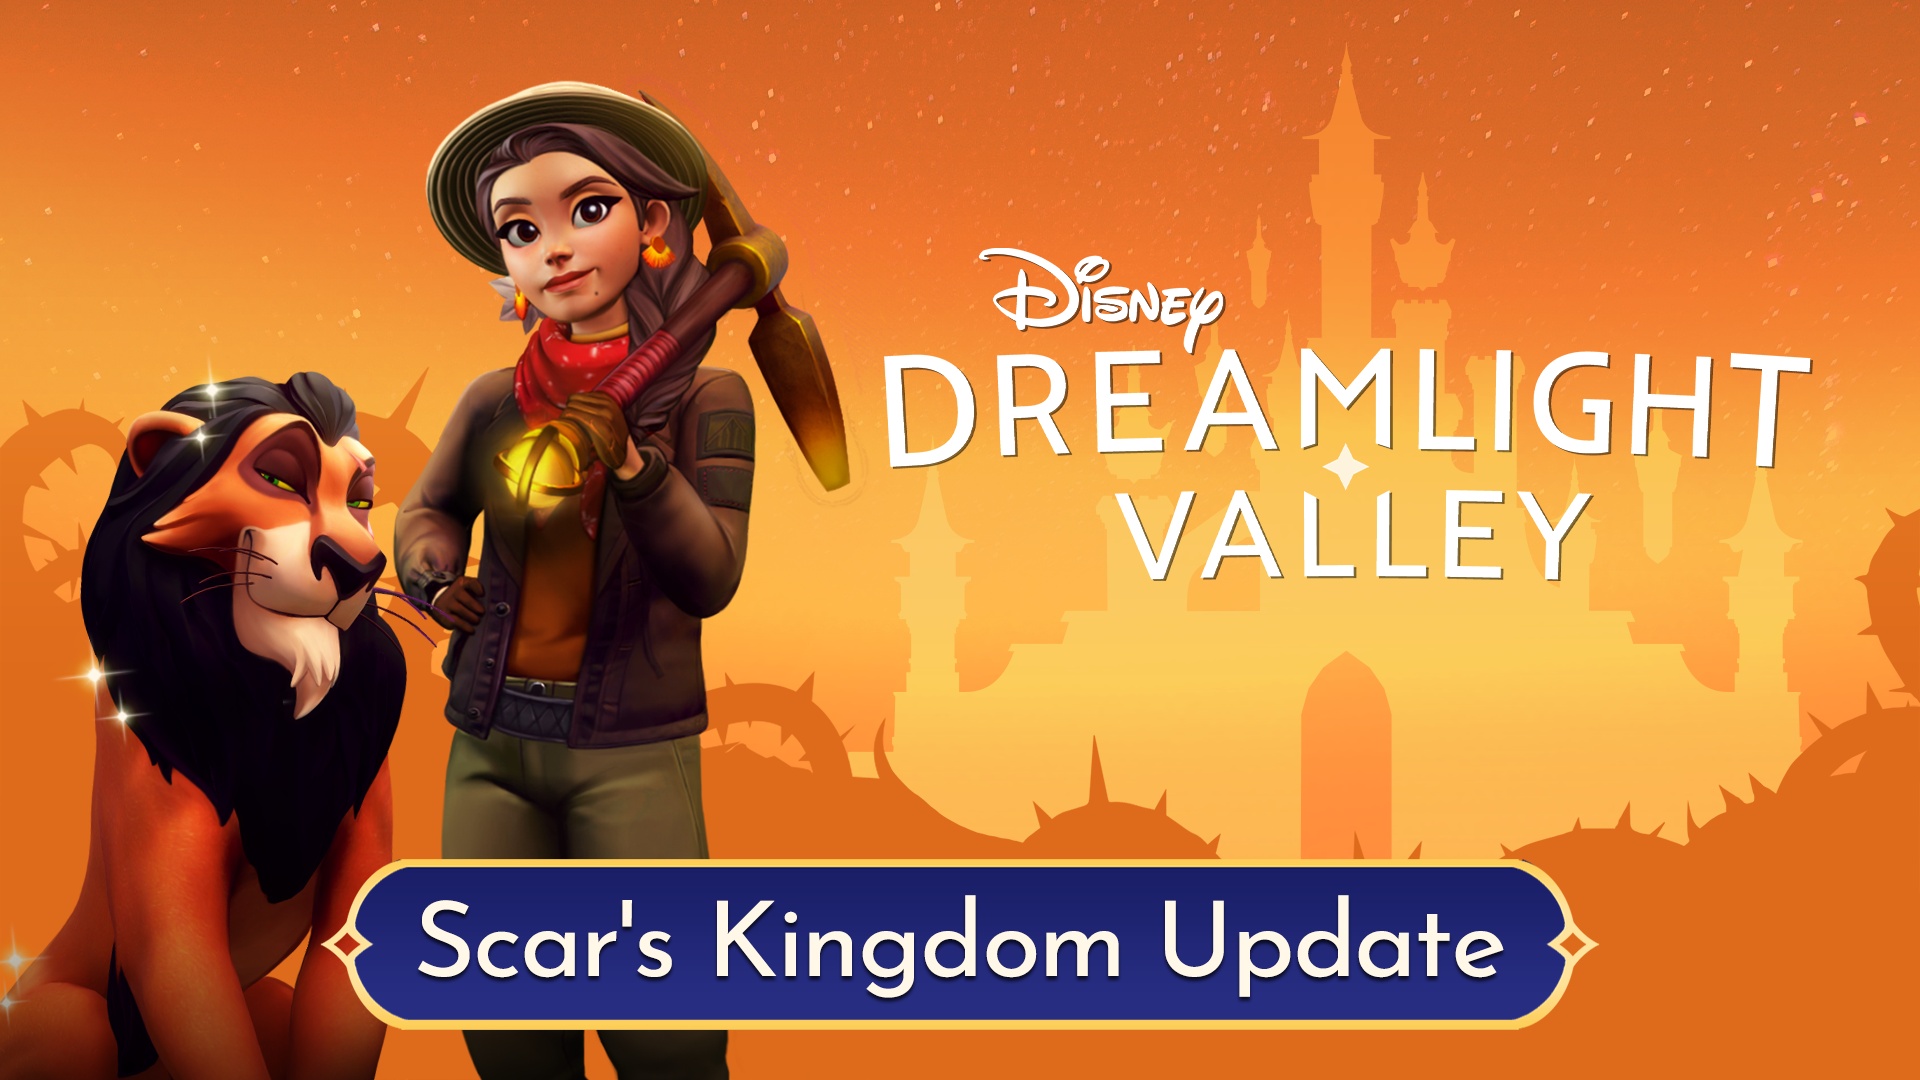 It’s Good To Be Bad in First Disney Dreamlight Valley Update: Scar's Kingdom